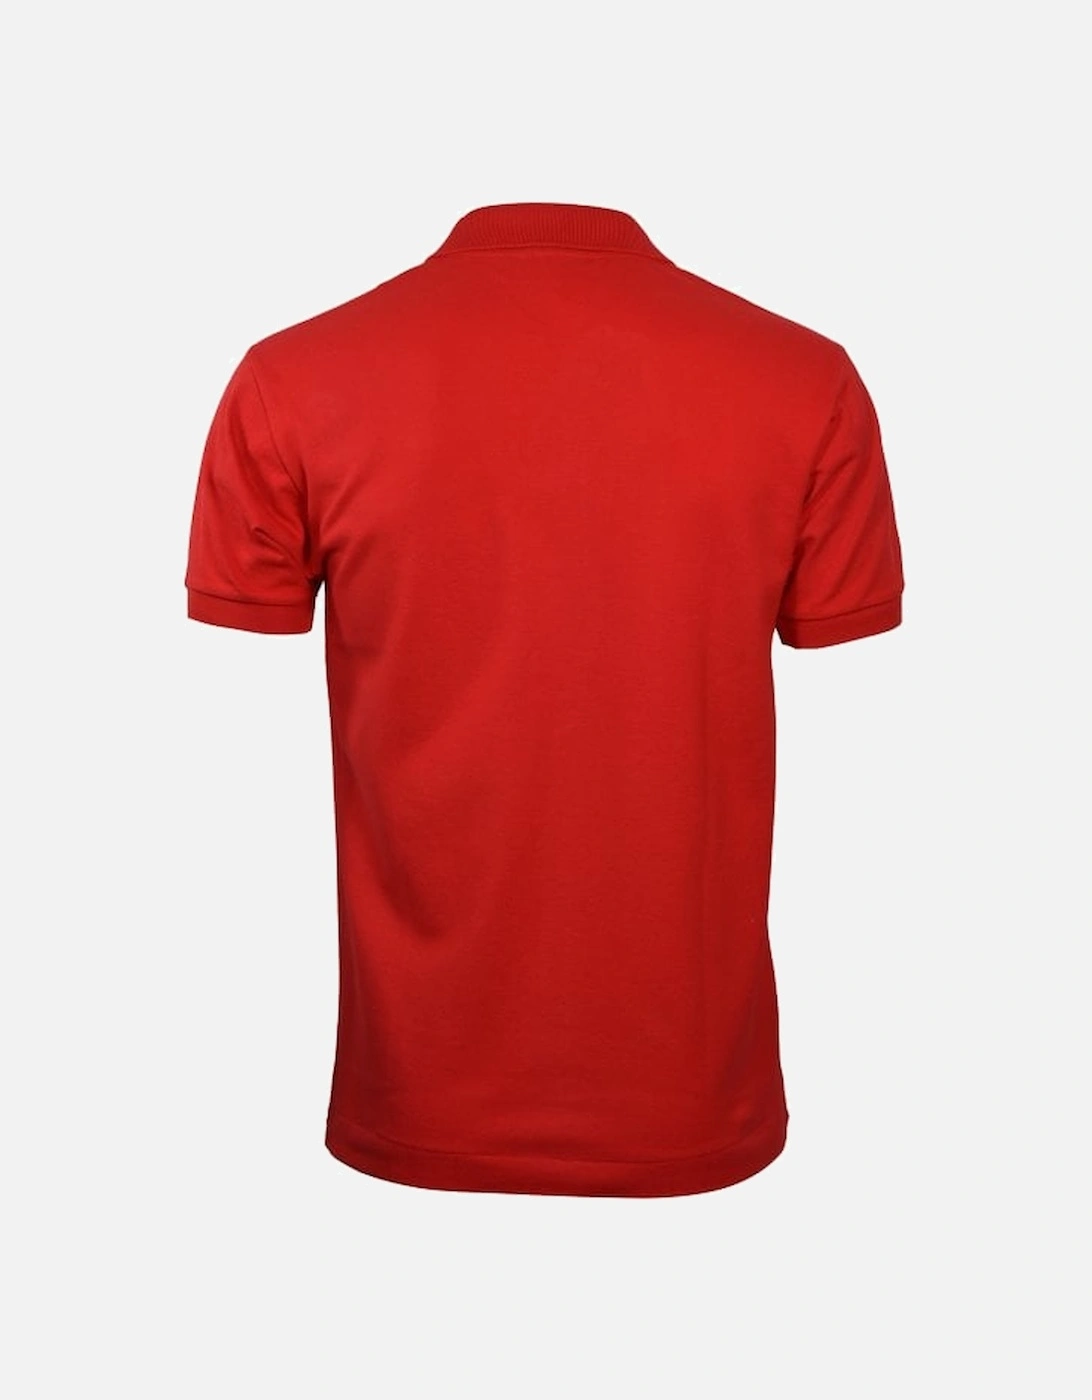 Classic Fit Pique Polo Shirt, Red